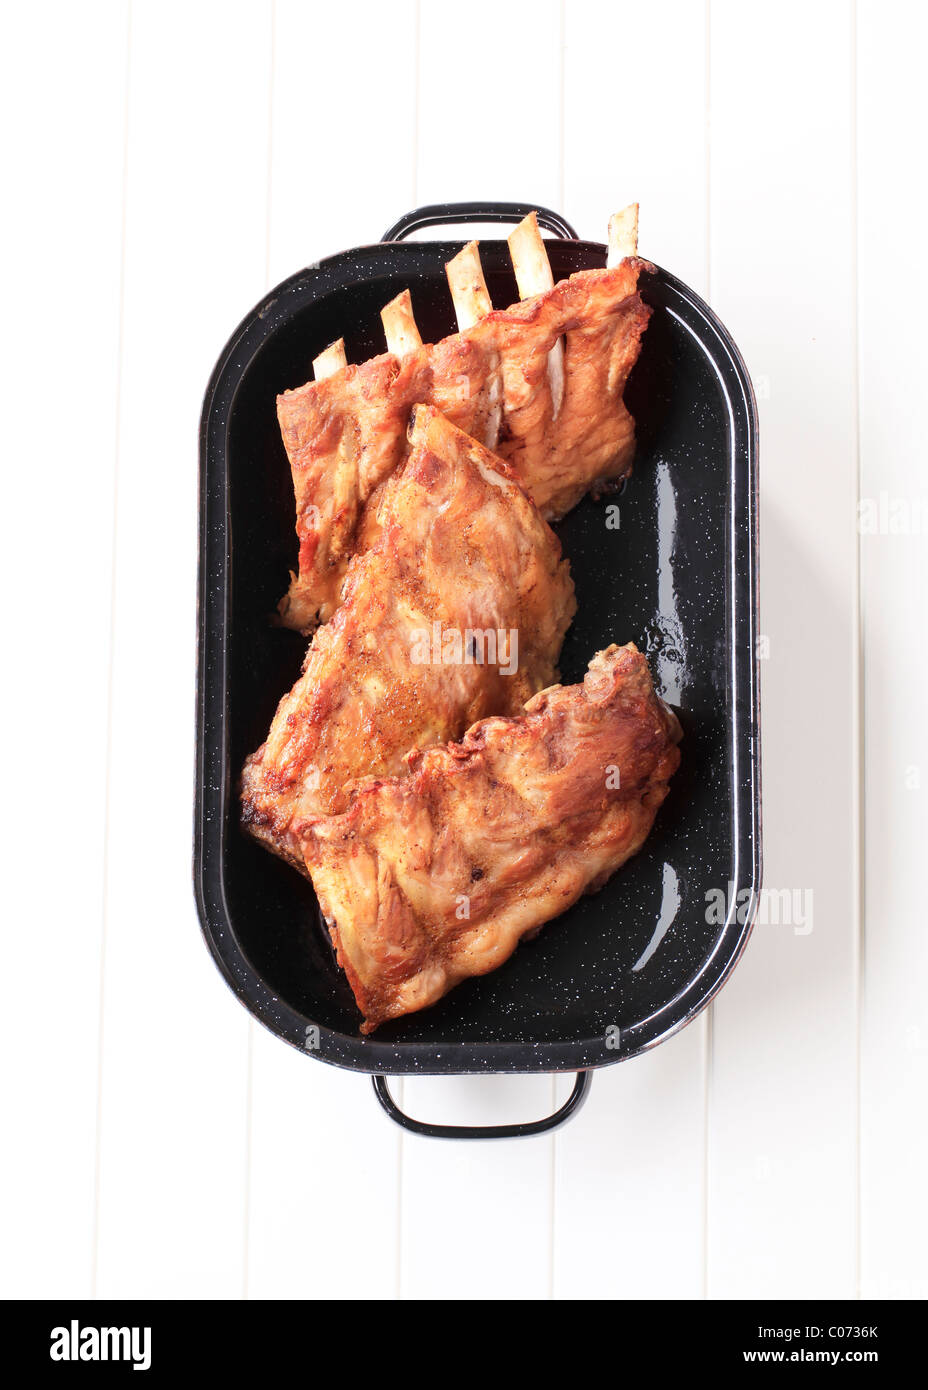 Oven-roasted rack of pork ribs in a pan Stock Photo